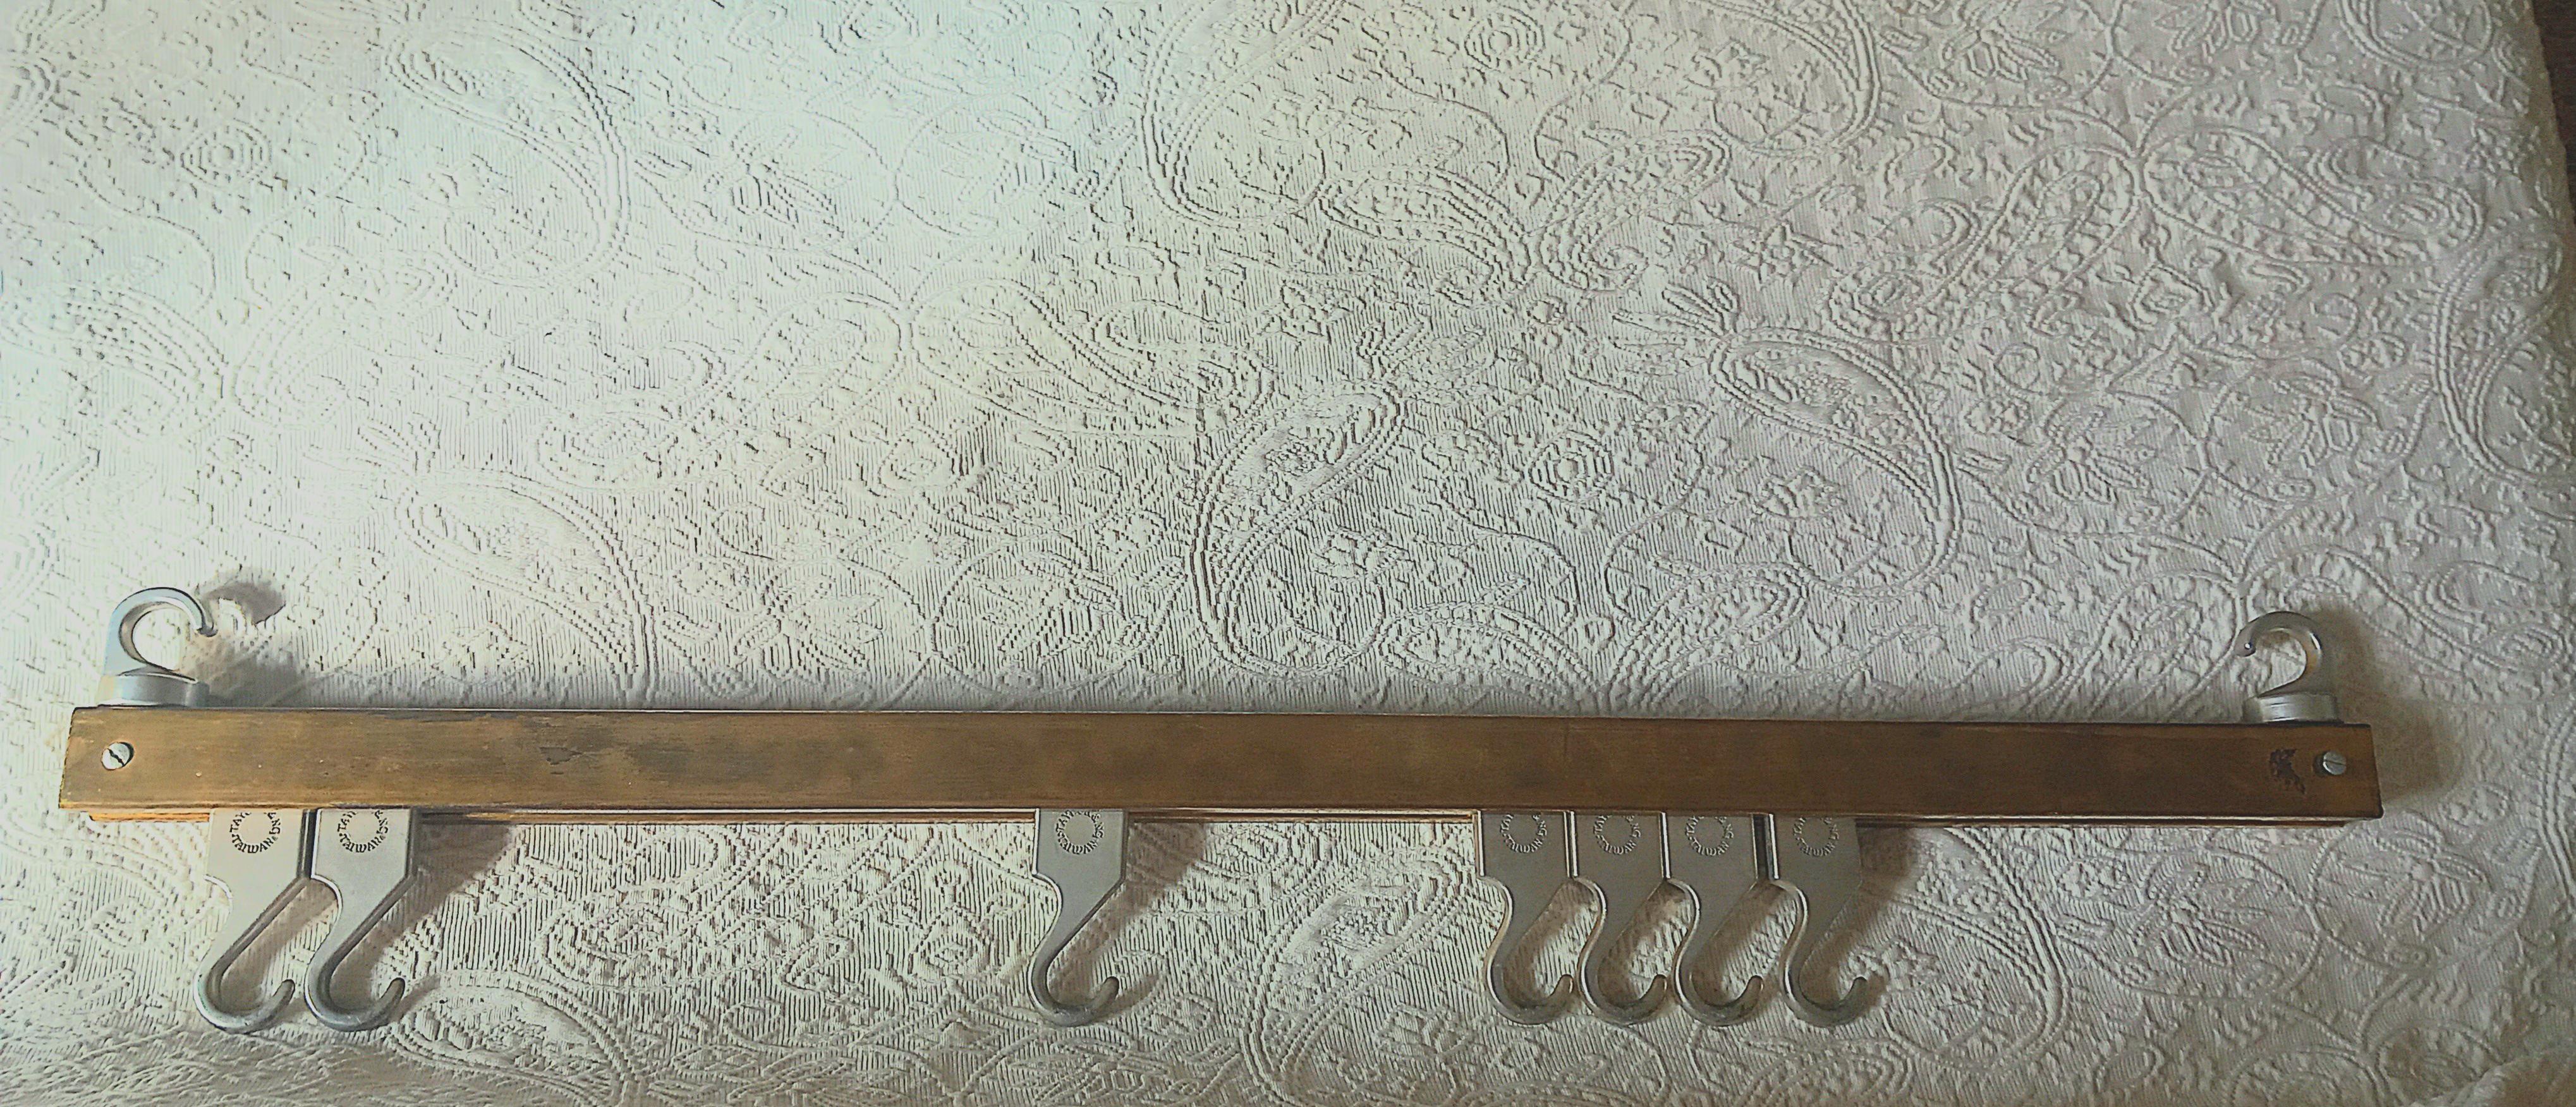 Butcher Hanger  Brass and Steel Whit 7 Movable Hooks.Industrial  Large Size 92cm 2